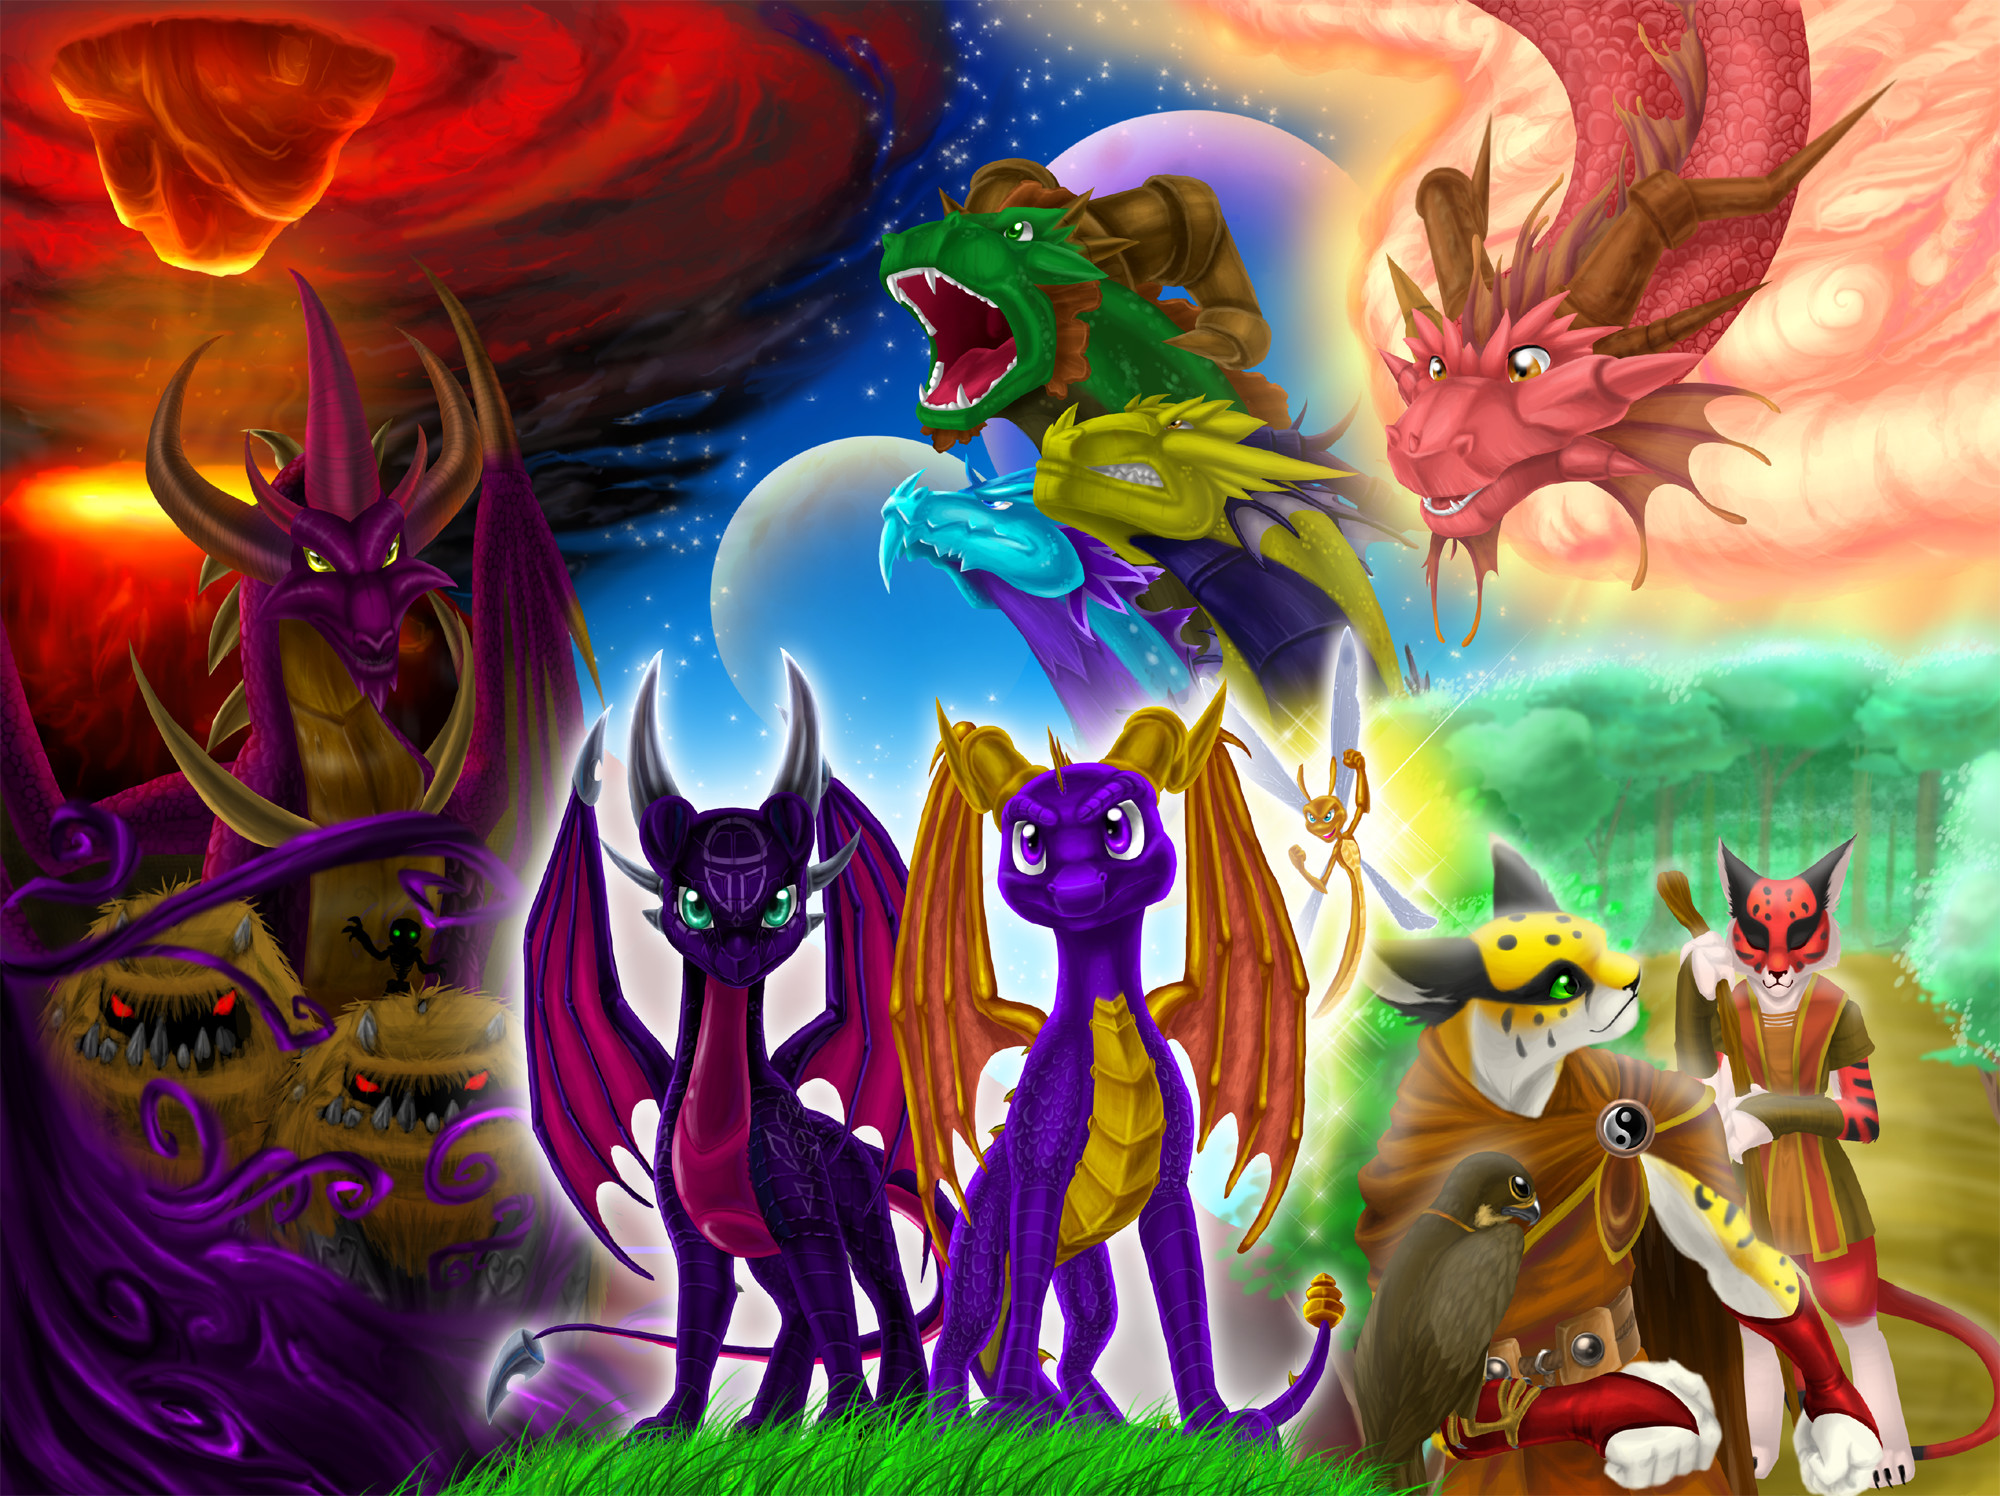 2000x1496 This is all from The Legend of Spyro: Dawn of the Dragon